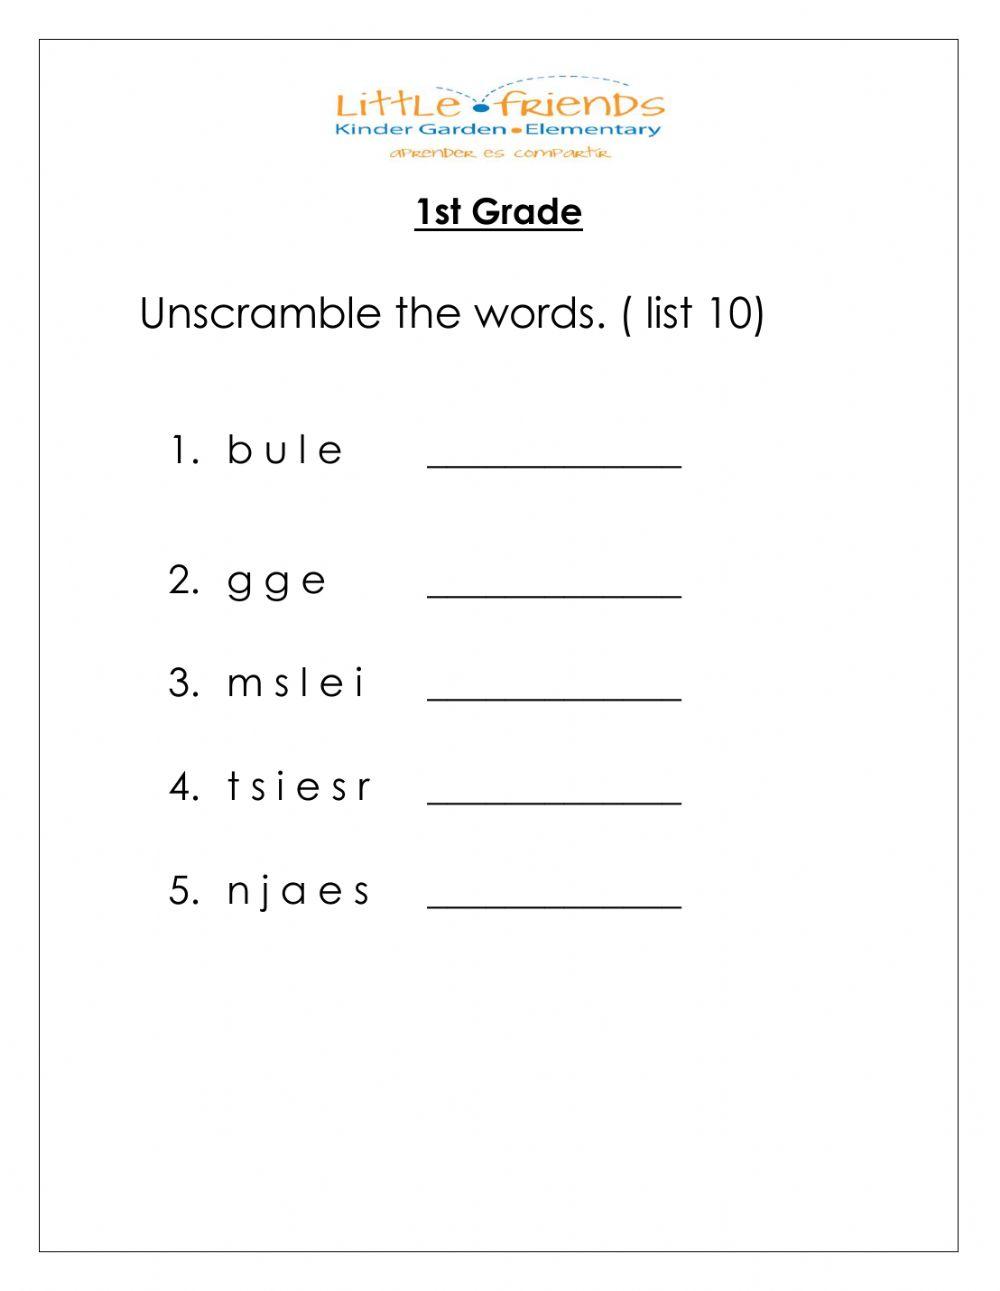 Spelling Unscramble the words